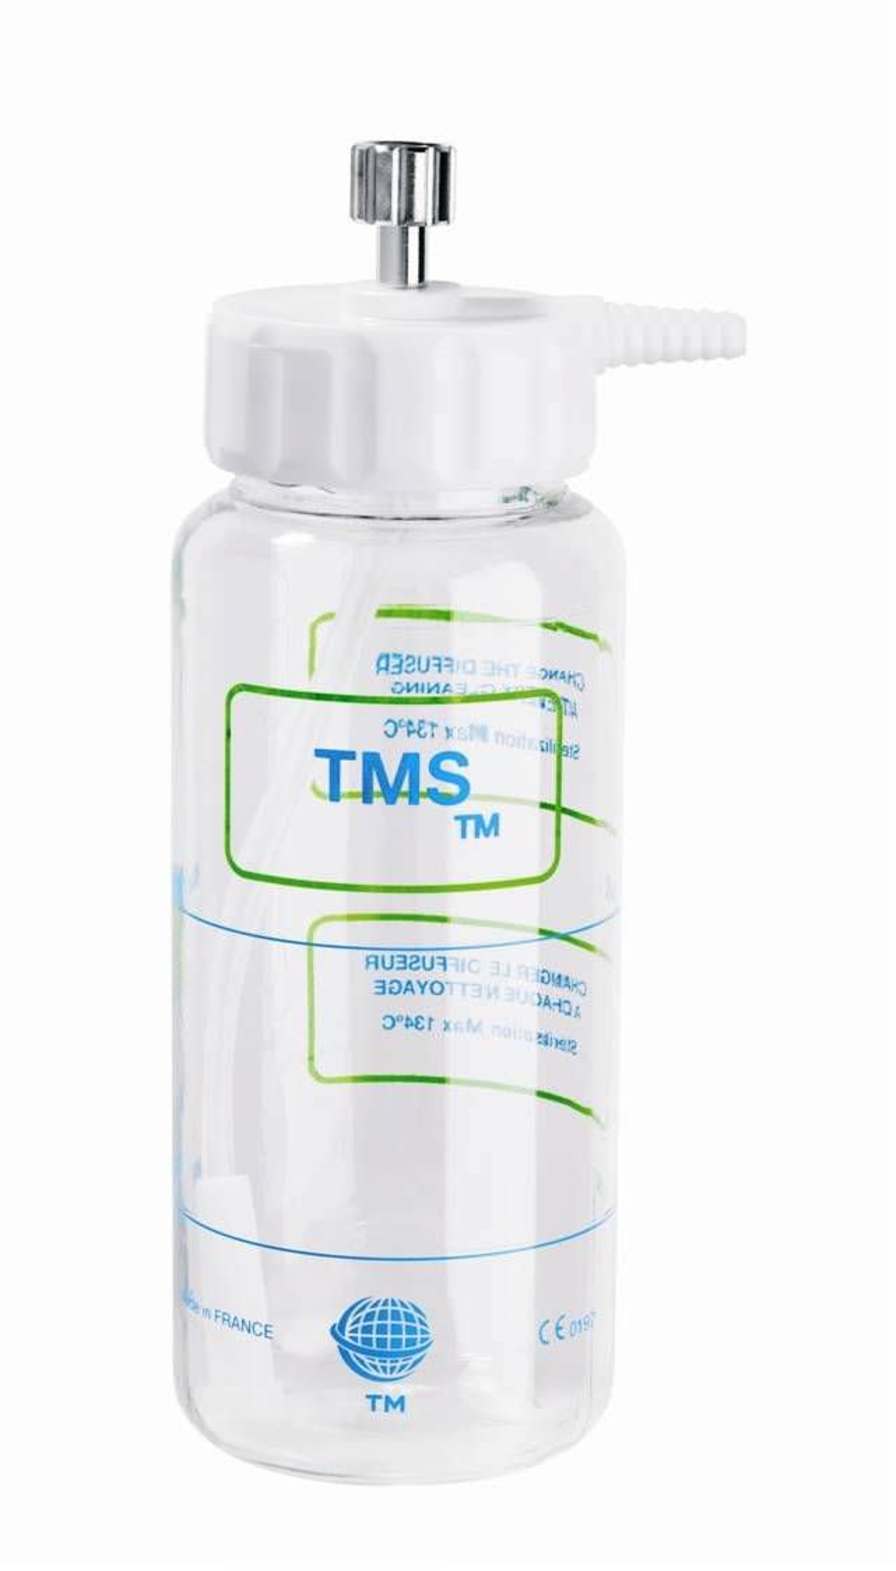 Bubble humidifier 500 mL | TMS Technologie Medicale